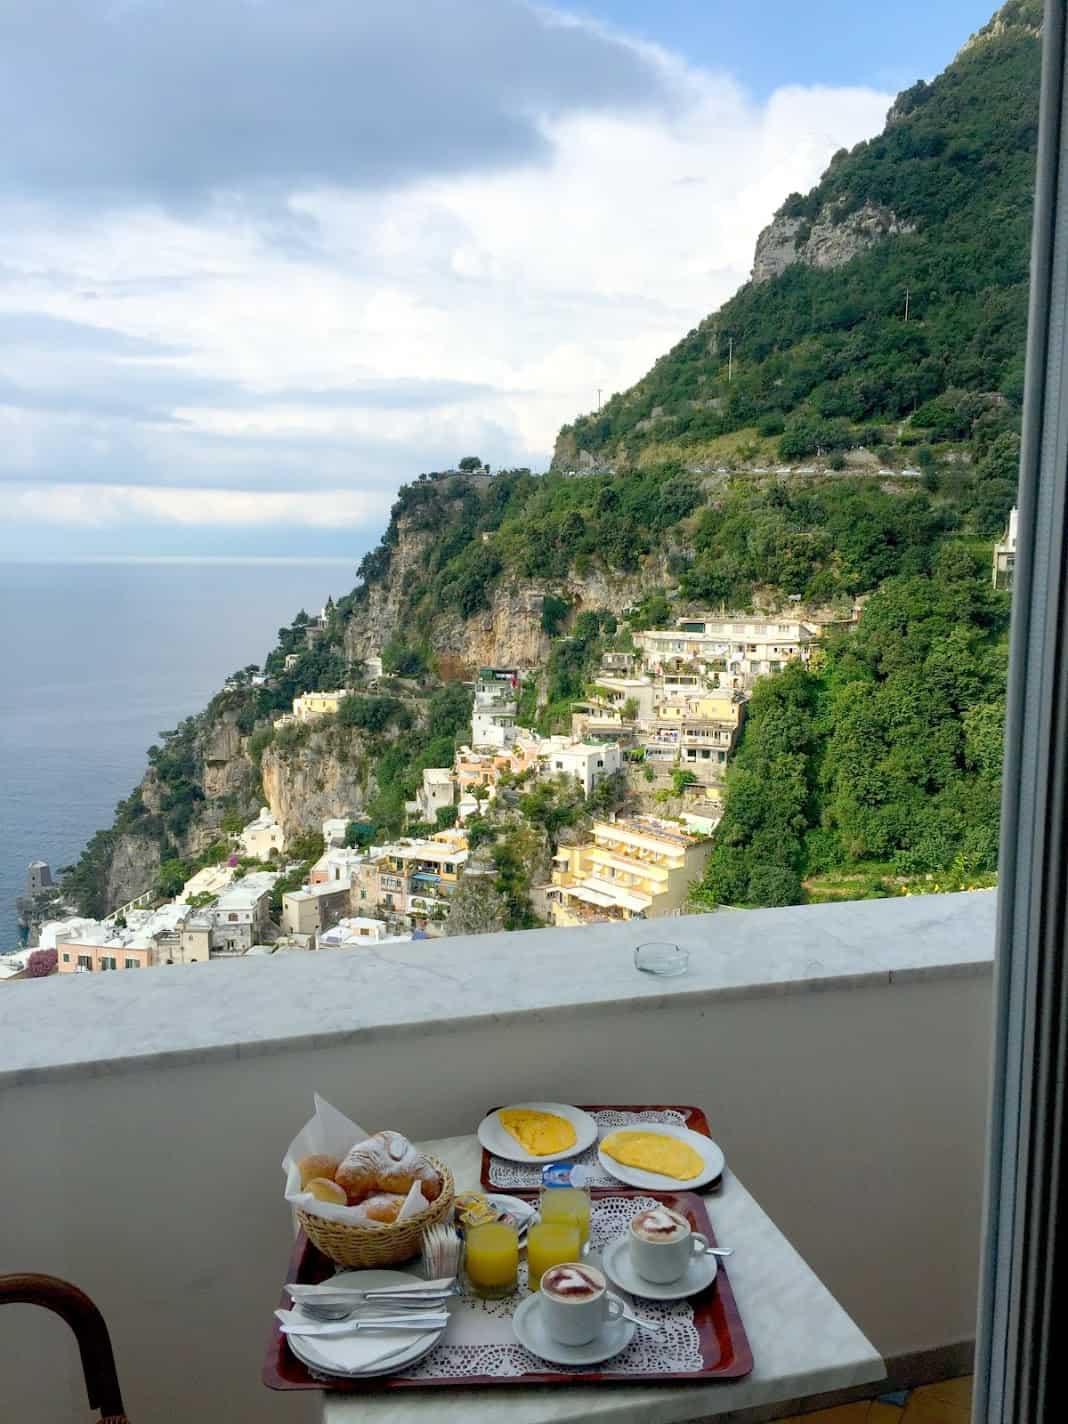 breakfast in Positano Italy with a view of the mountains and sea